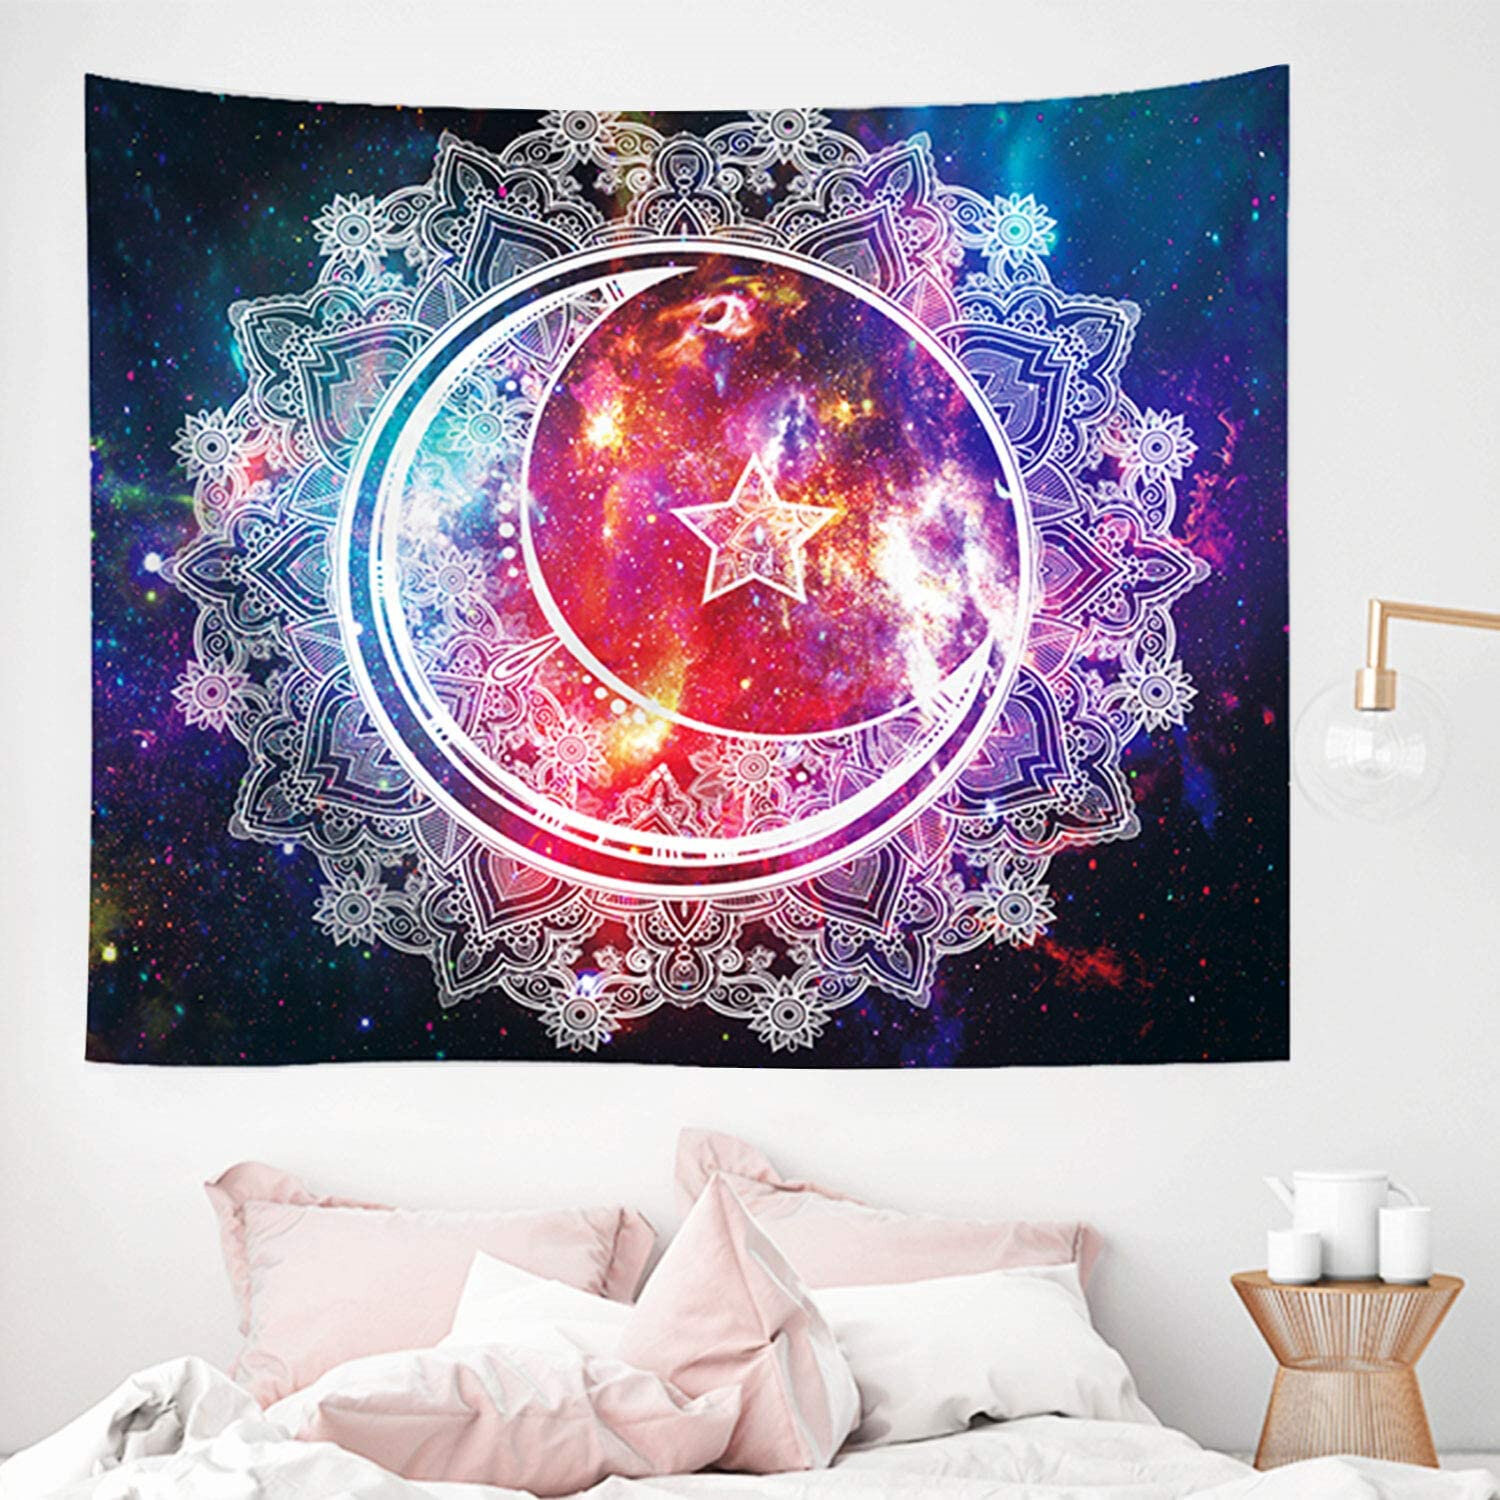 Sunflower Moon Phase Tapestry Starry Sky Wall Hanging Home Decor Bedspread Cover 